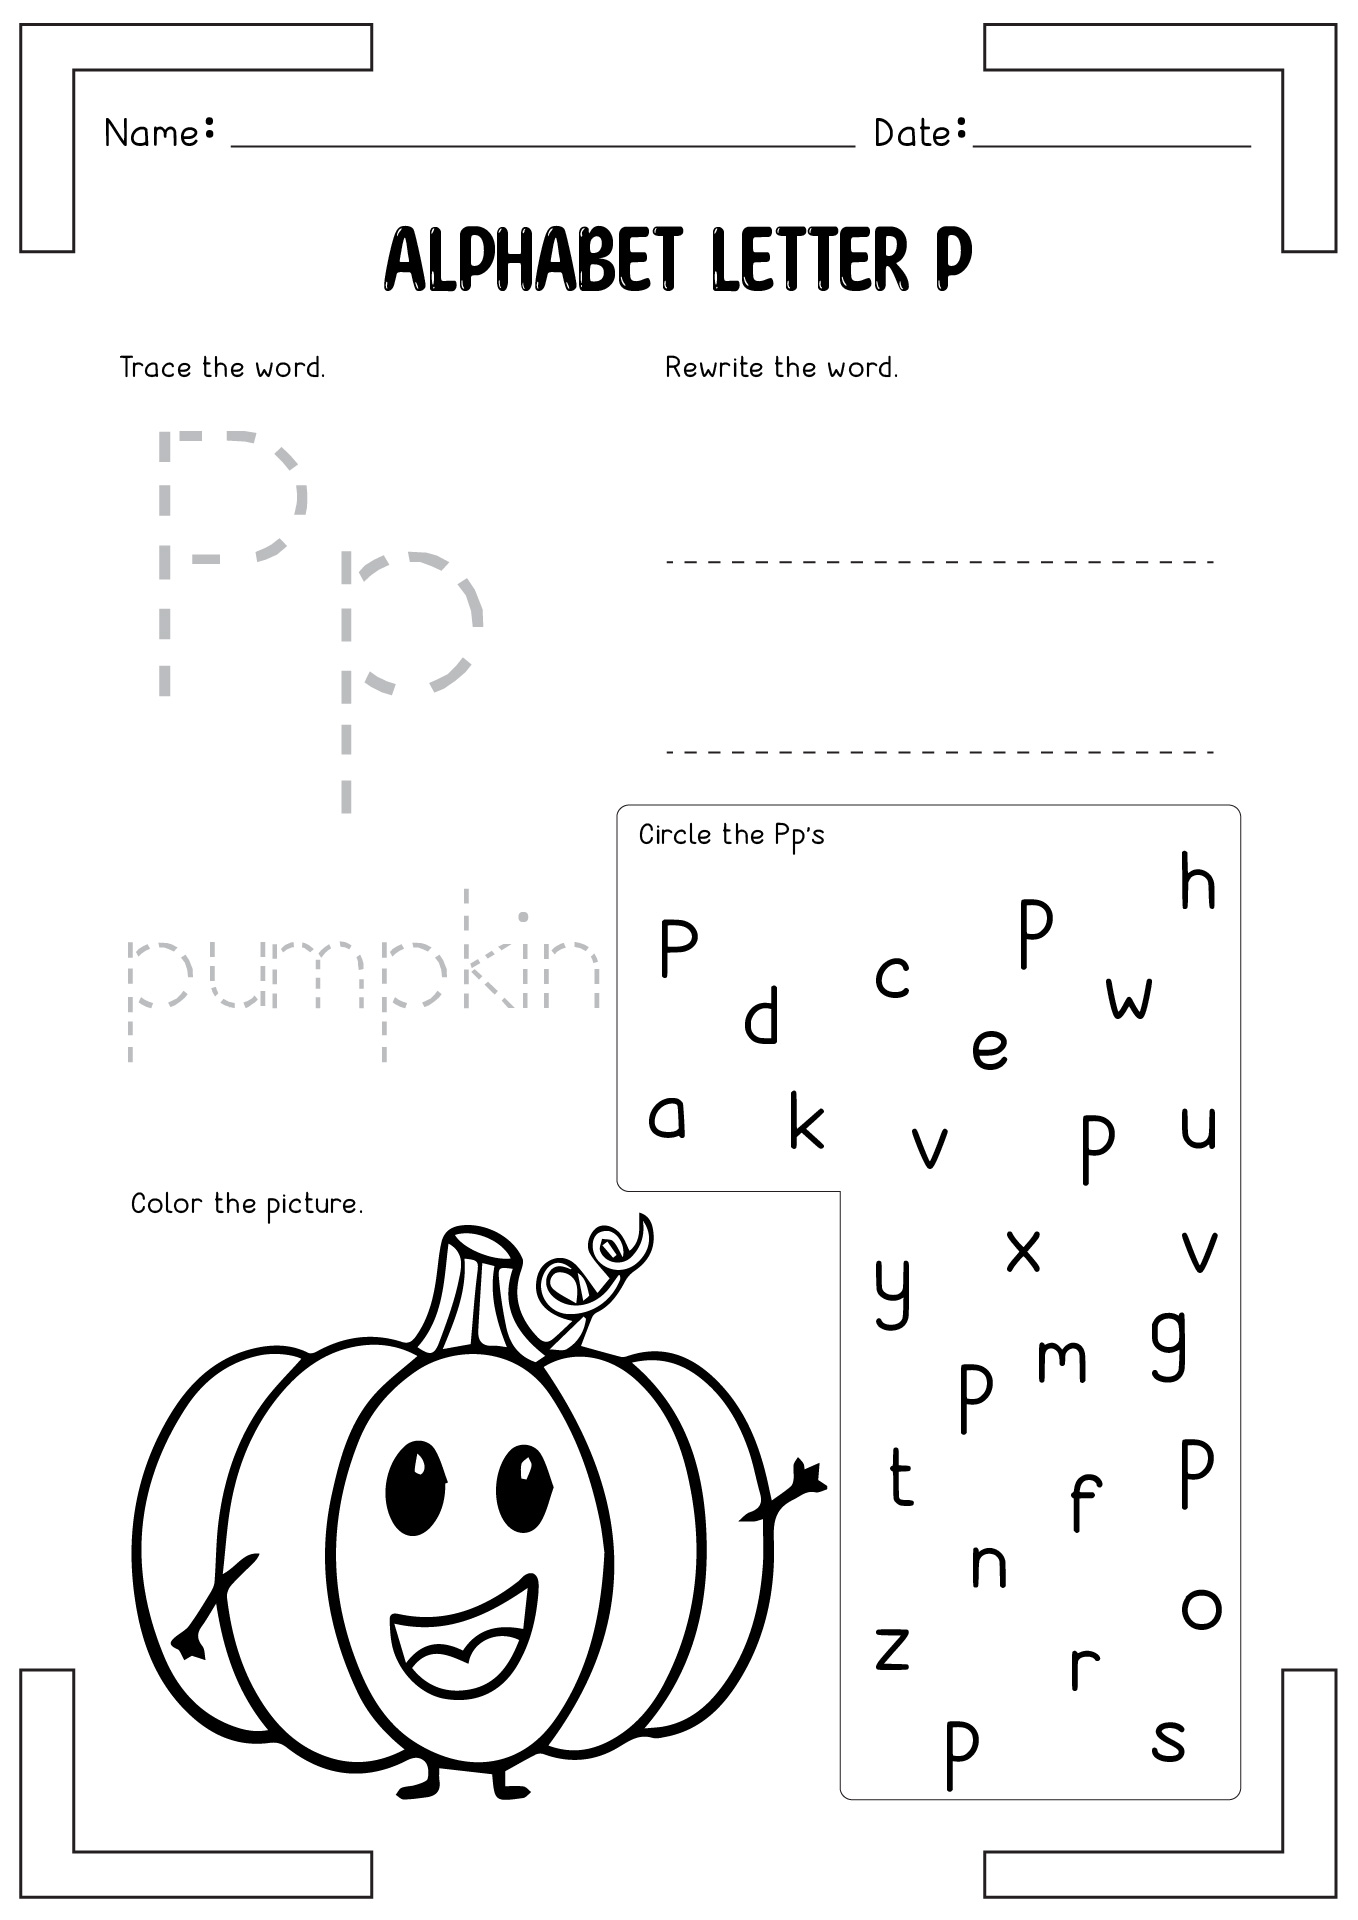 18 Best Images Of Kindergarten Cut And Paste Worksheets Phonics Cut And Paste CVC Words 